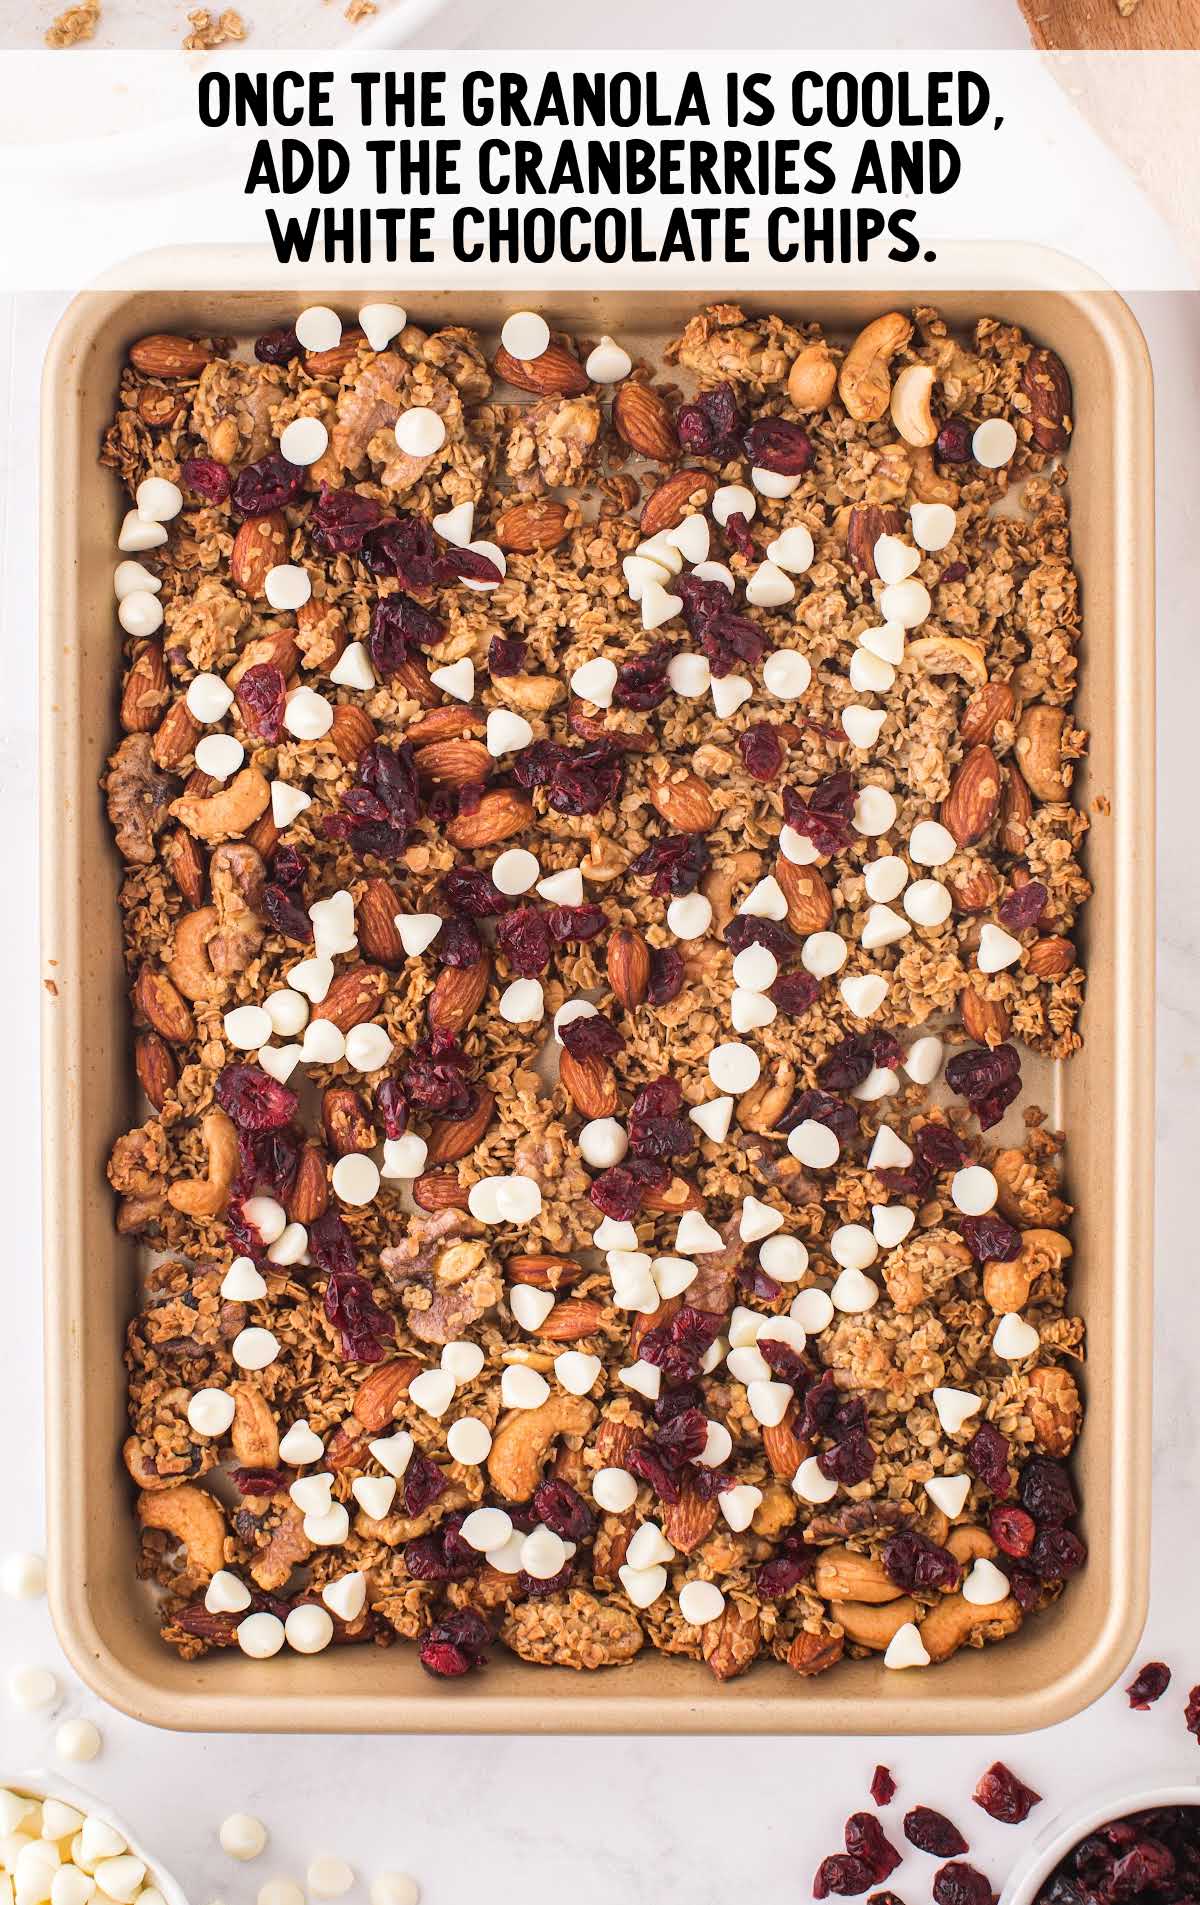 cranberries and white chocolate chips added on a sheet pan